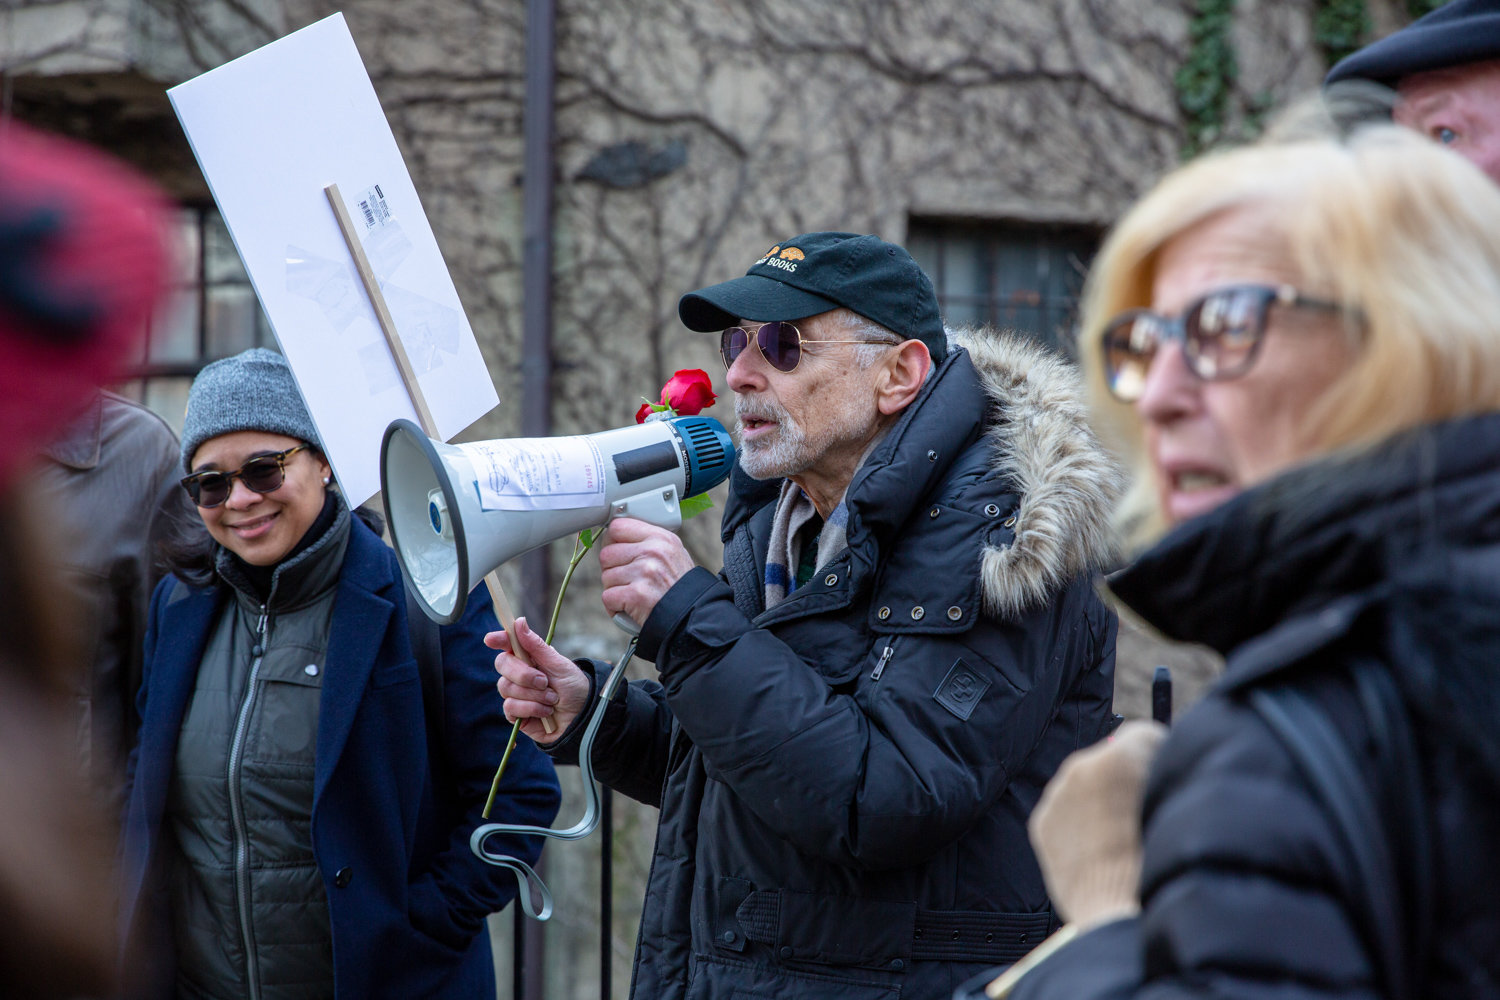 Perry Brass rallies a group of concerned neighbors in front of the sister buildings of the Villa Rosa Bonheur before leading the crowd to the threatened apartment building for a vigil in February.